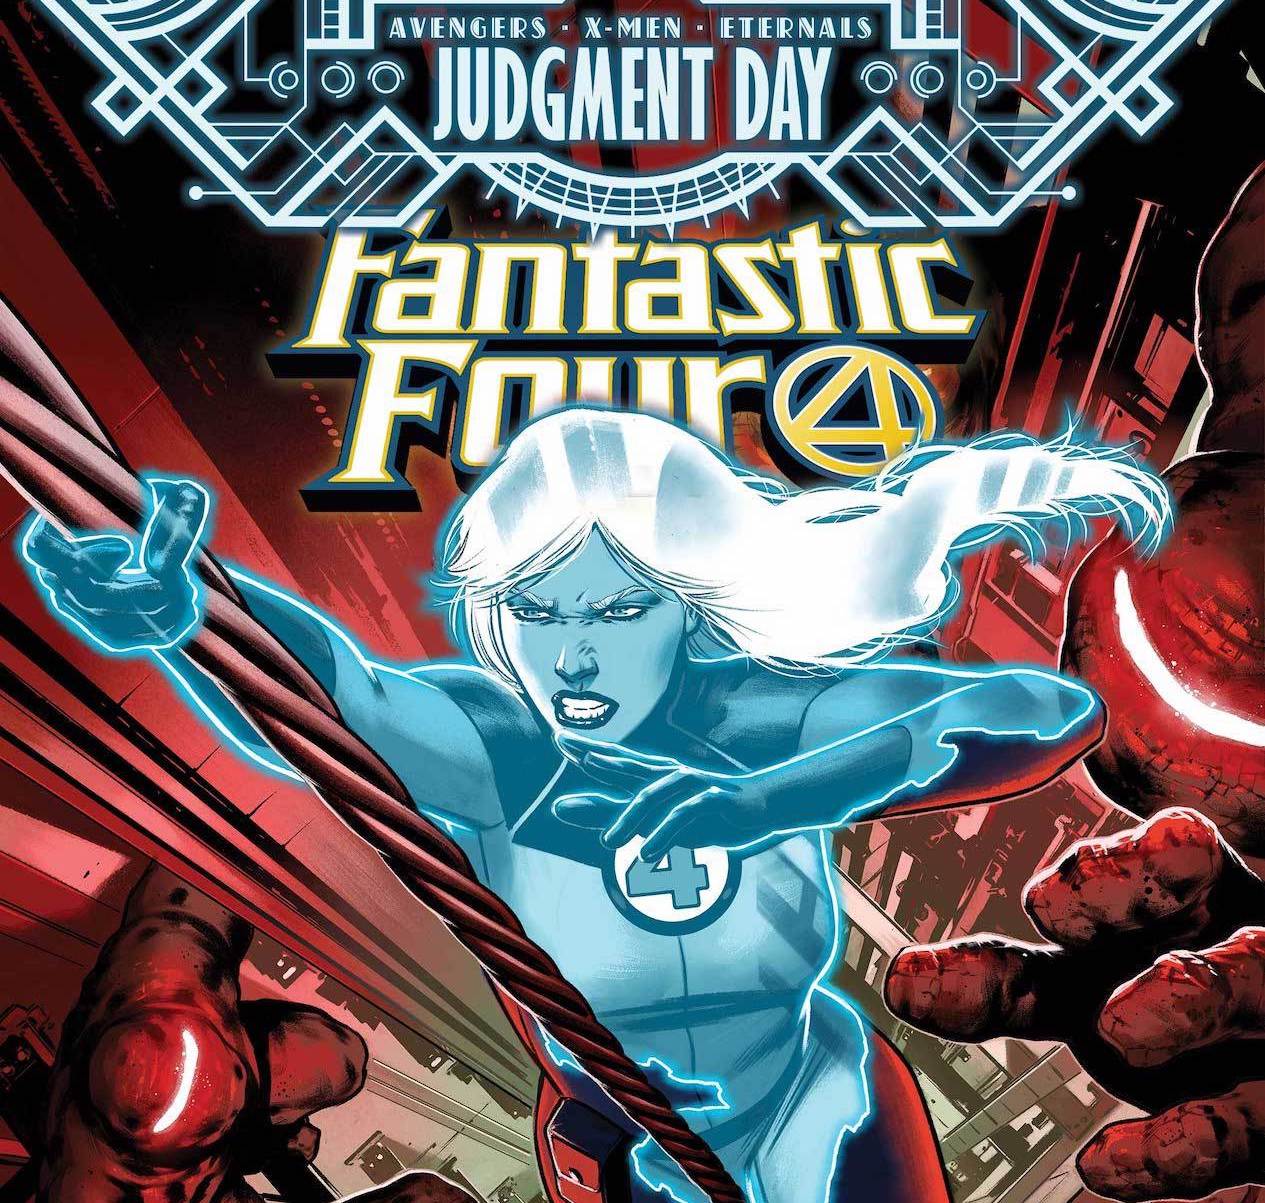 'Fantastic Four' #47 shows how badass Invisible Woman can be